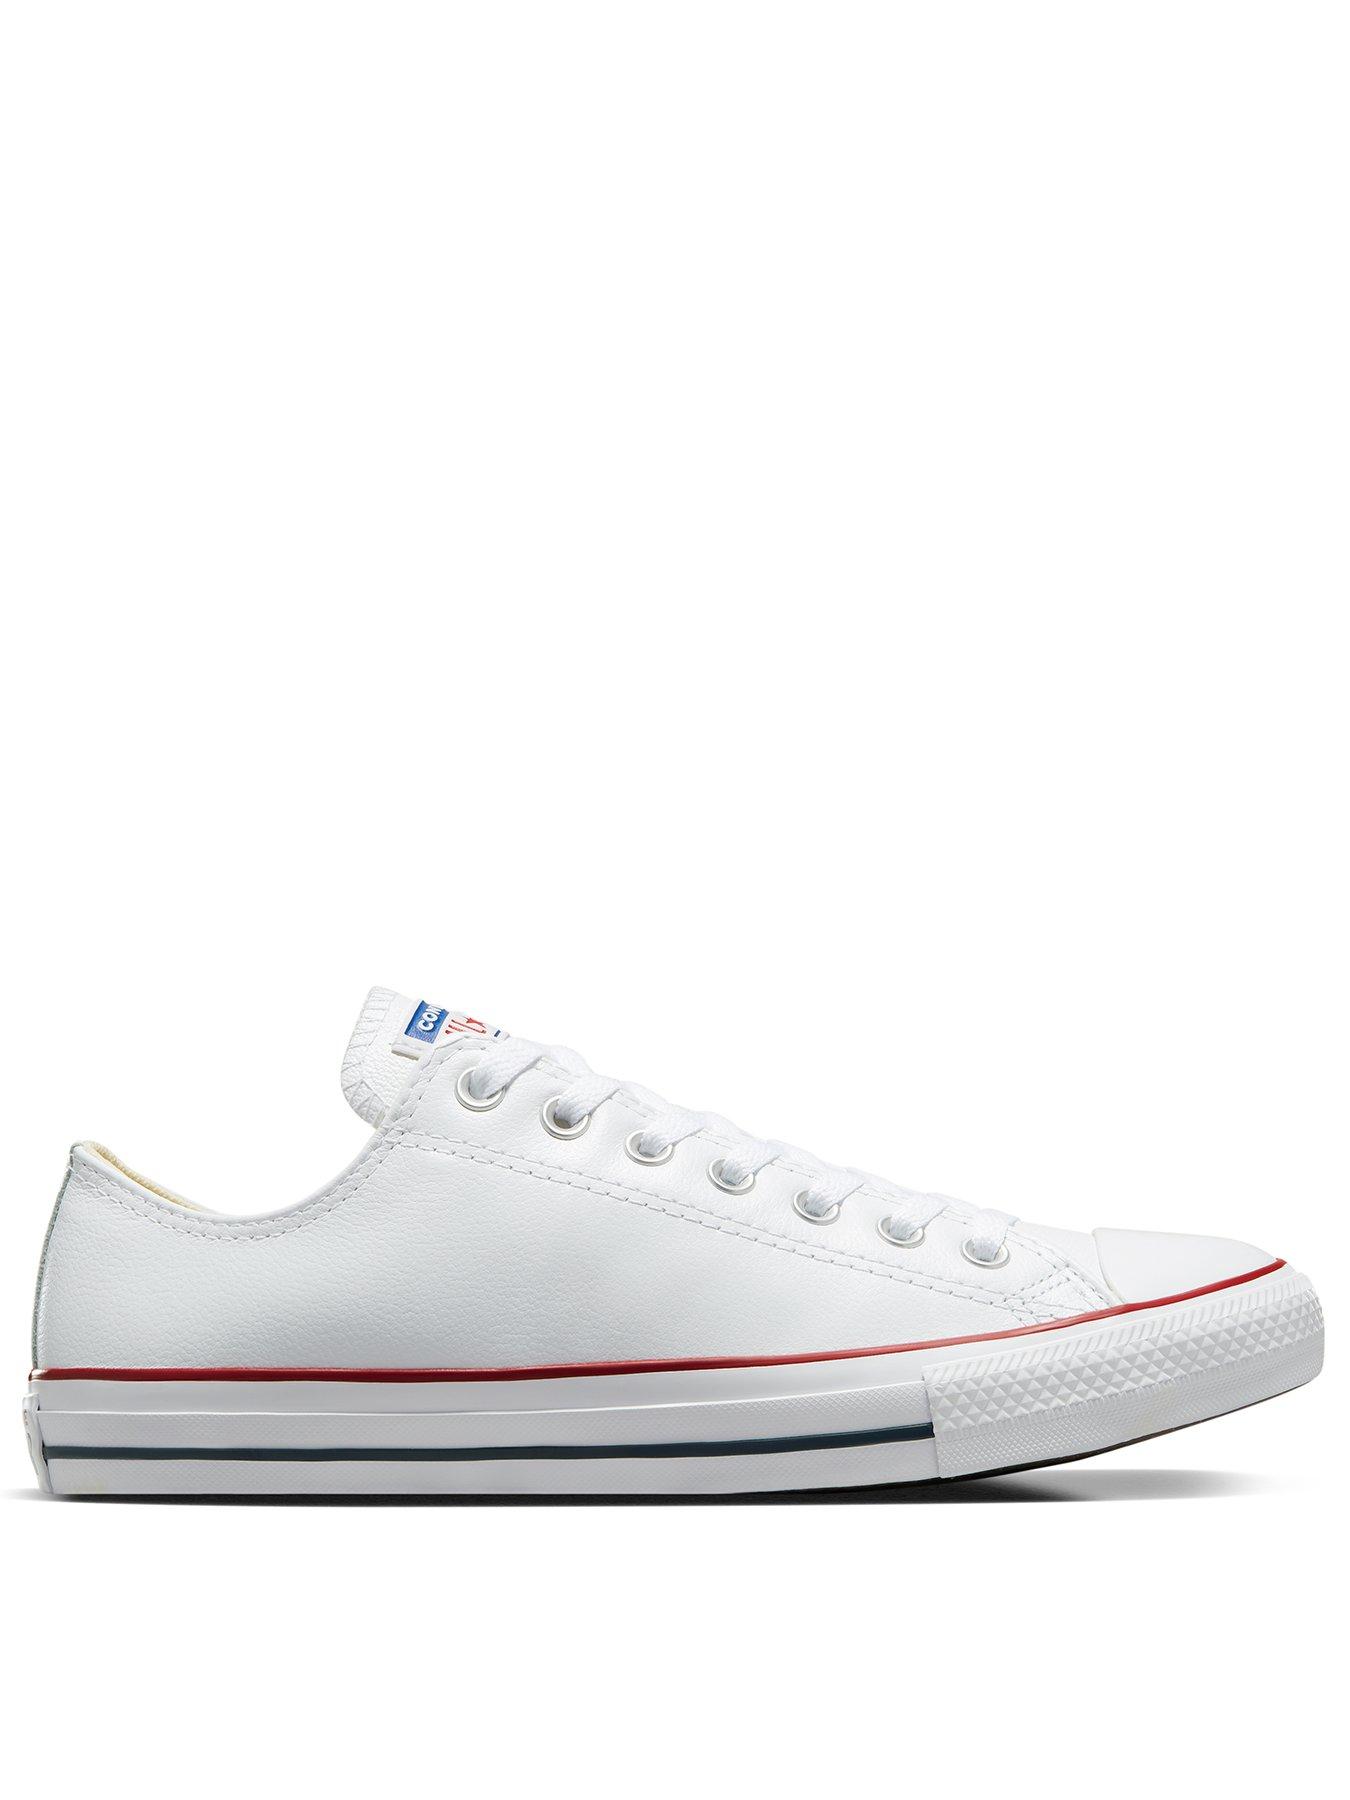 Converse Womens Leather Ox Trainers - White, White, Size 9, Women